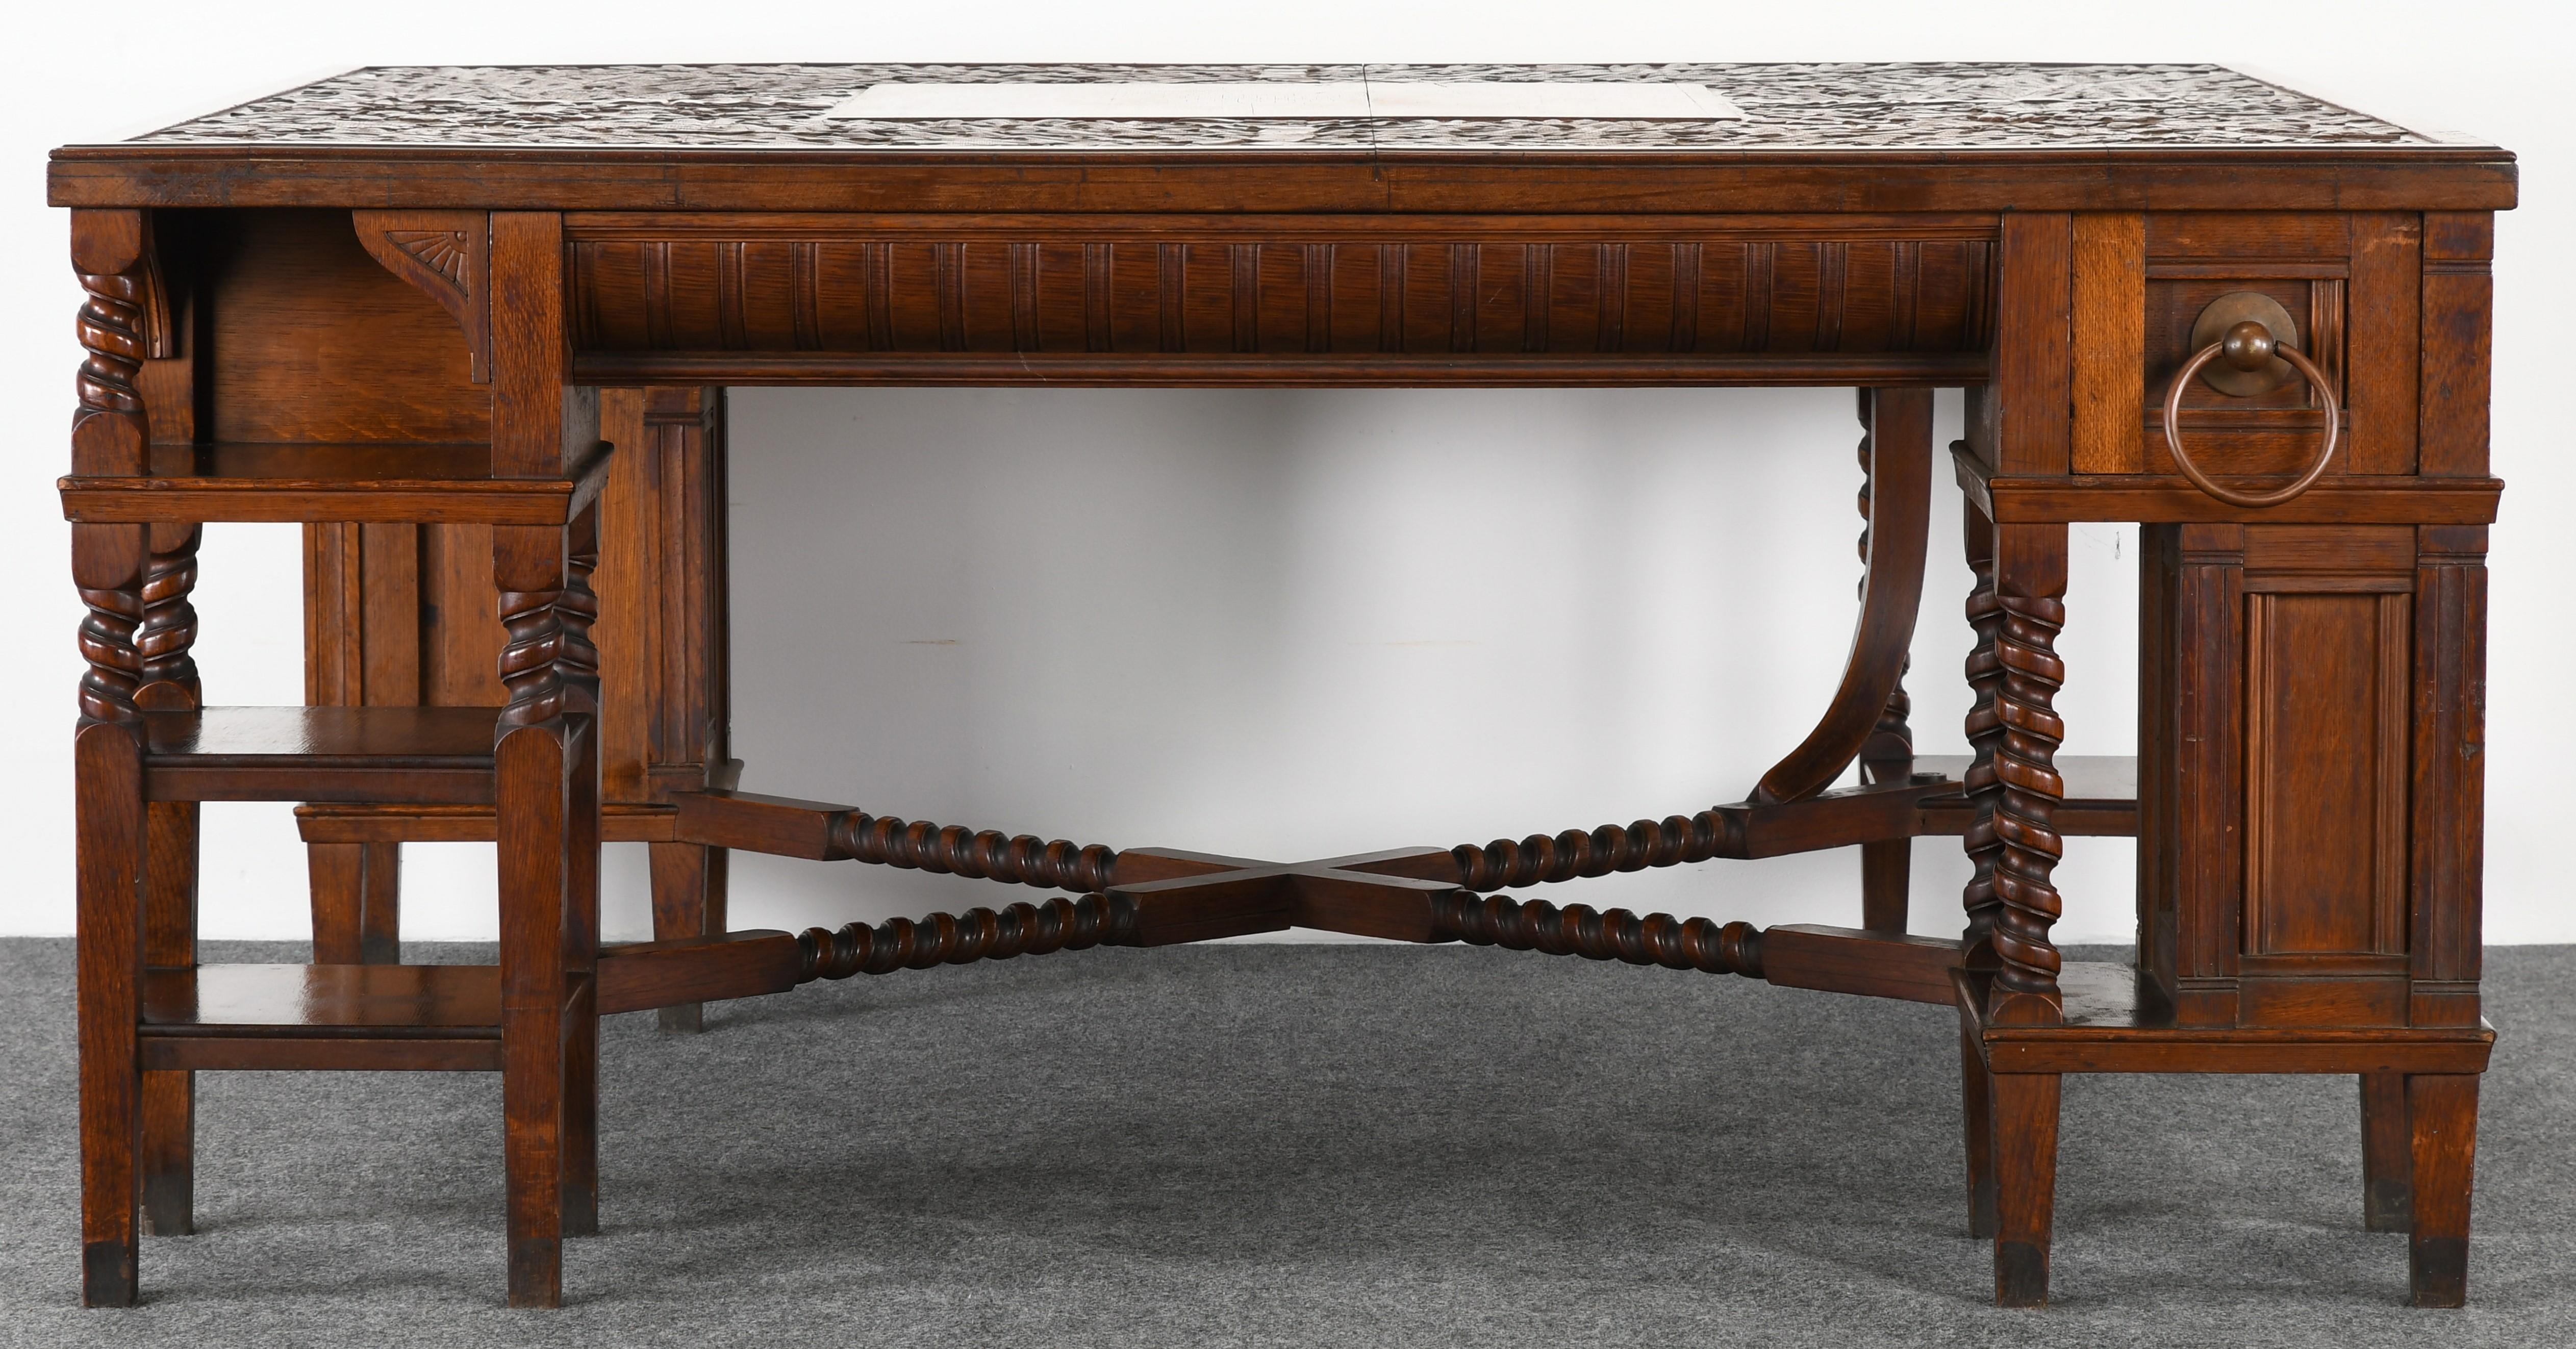 This Birchbrow library desk is an important and historical piece once belonging to Father Thomas Sanders, a friend of Alexander Graham Bell. The desk was crafted in the 1880s where he built 